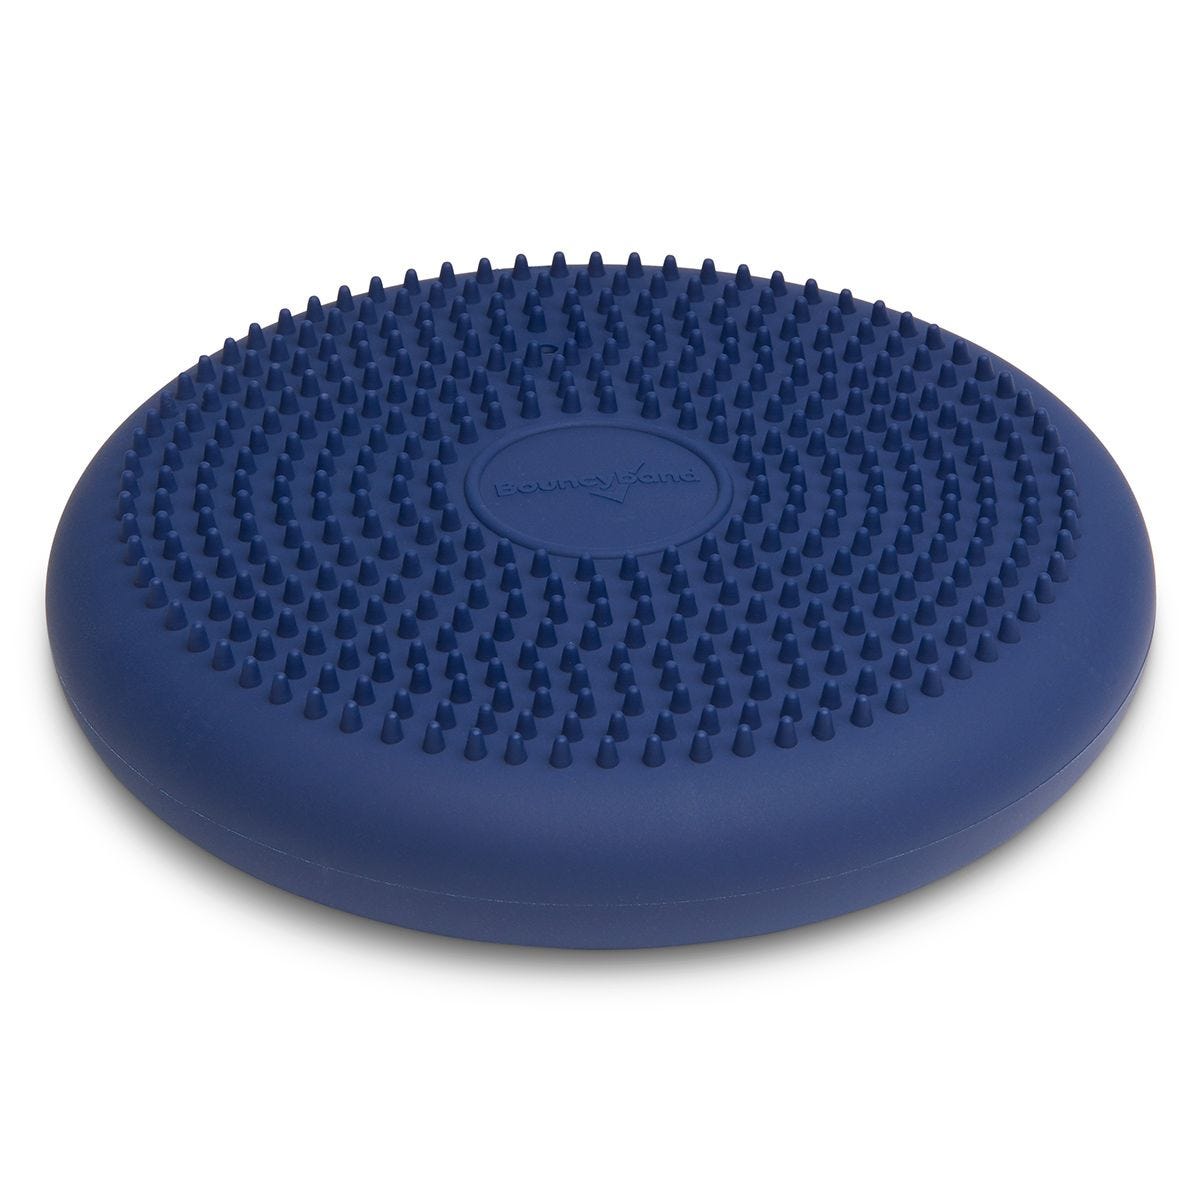 Bouncyband Sit & Twist Active Seat Cushion